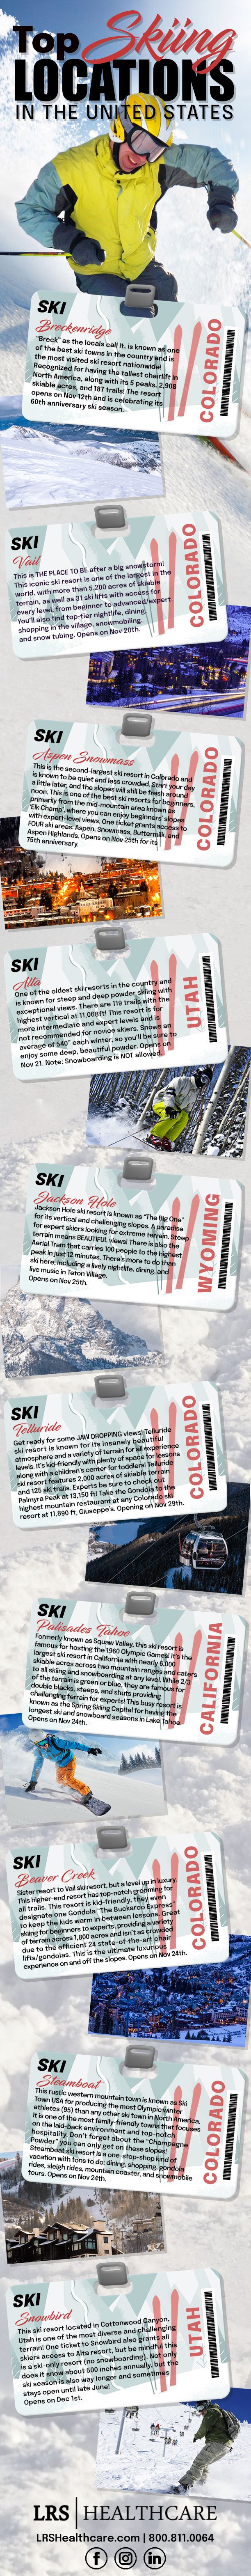 A list of top skiing spots in the U.S.